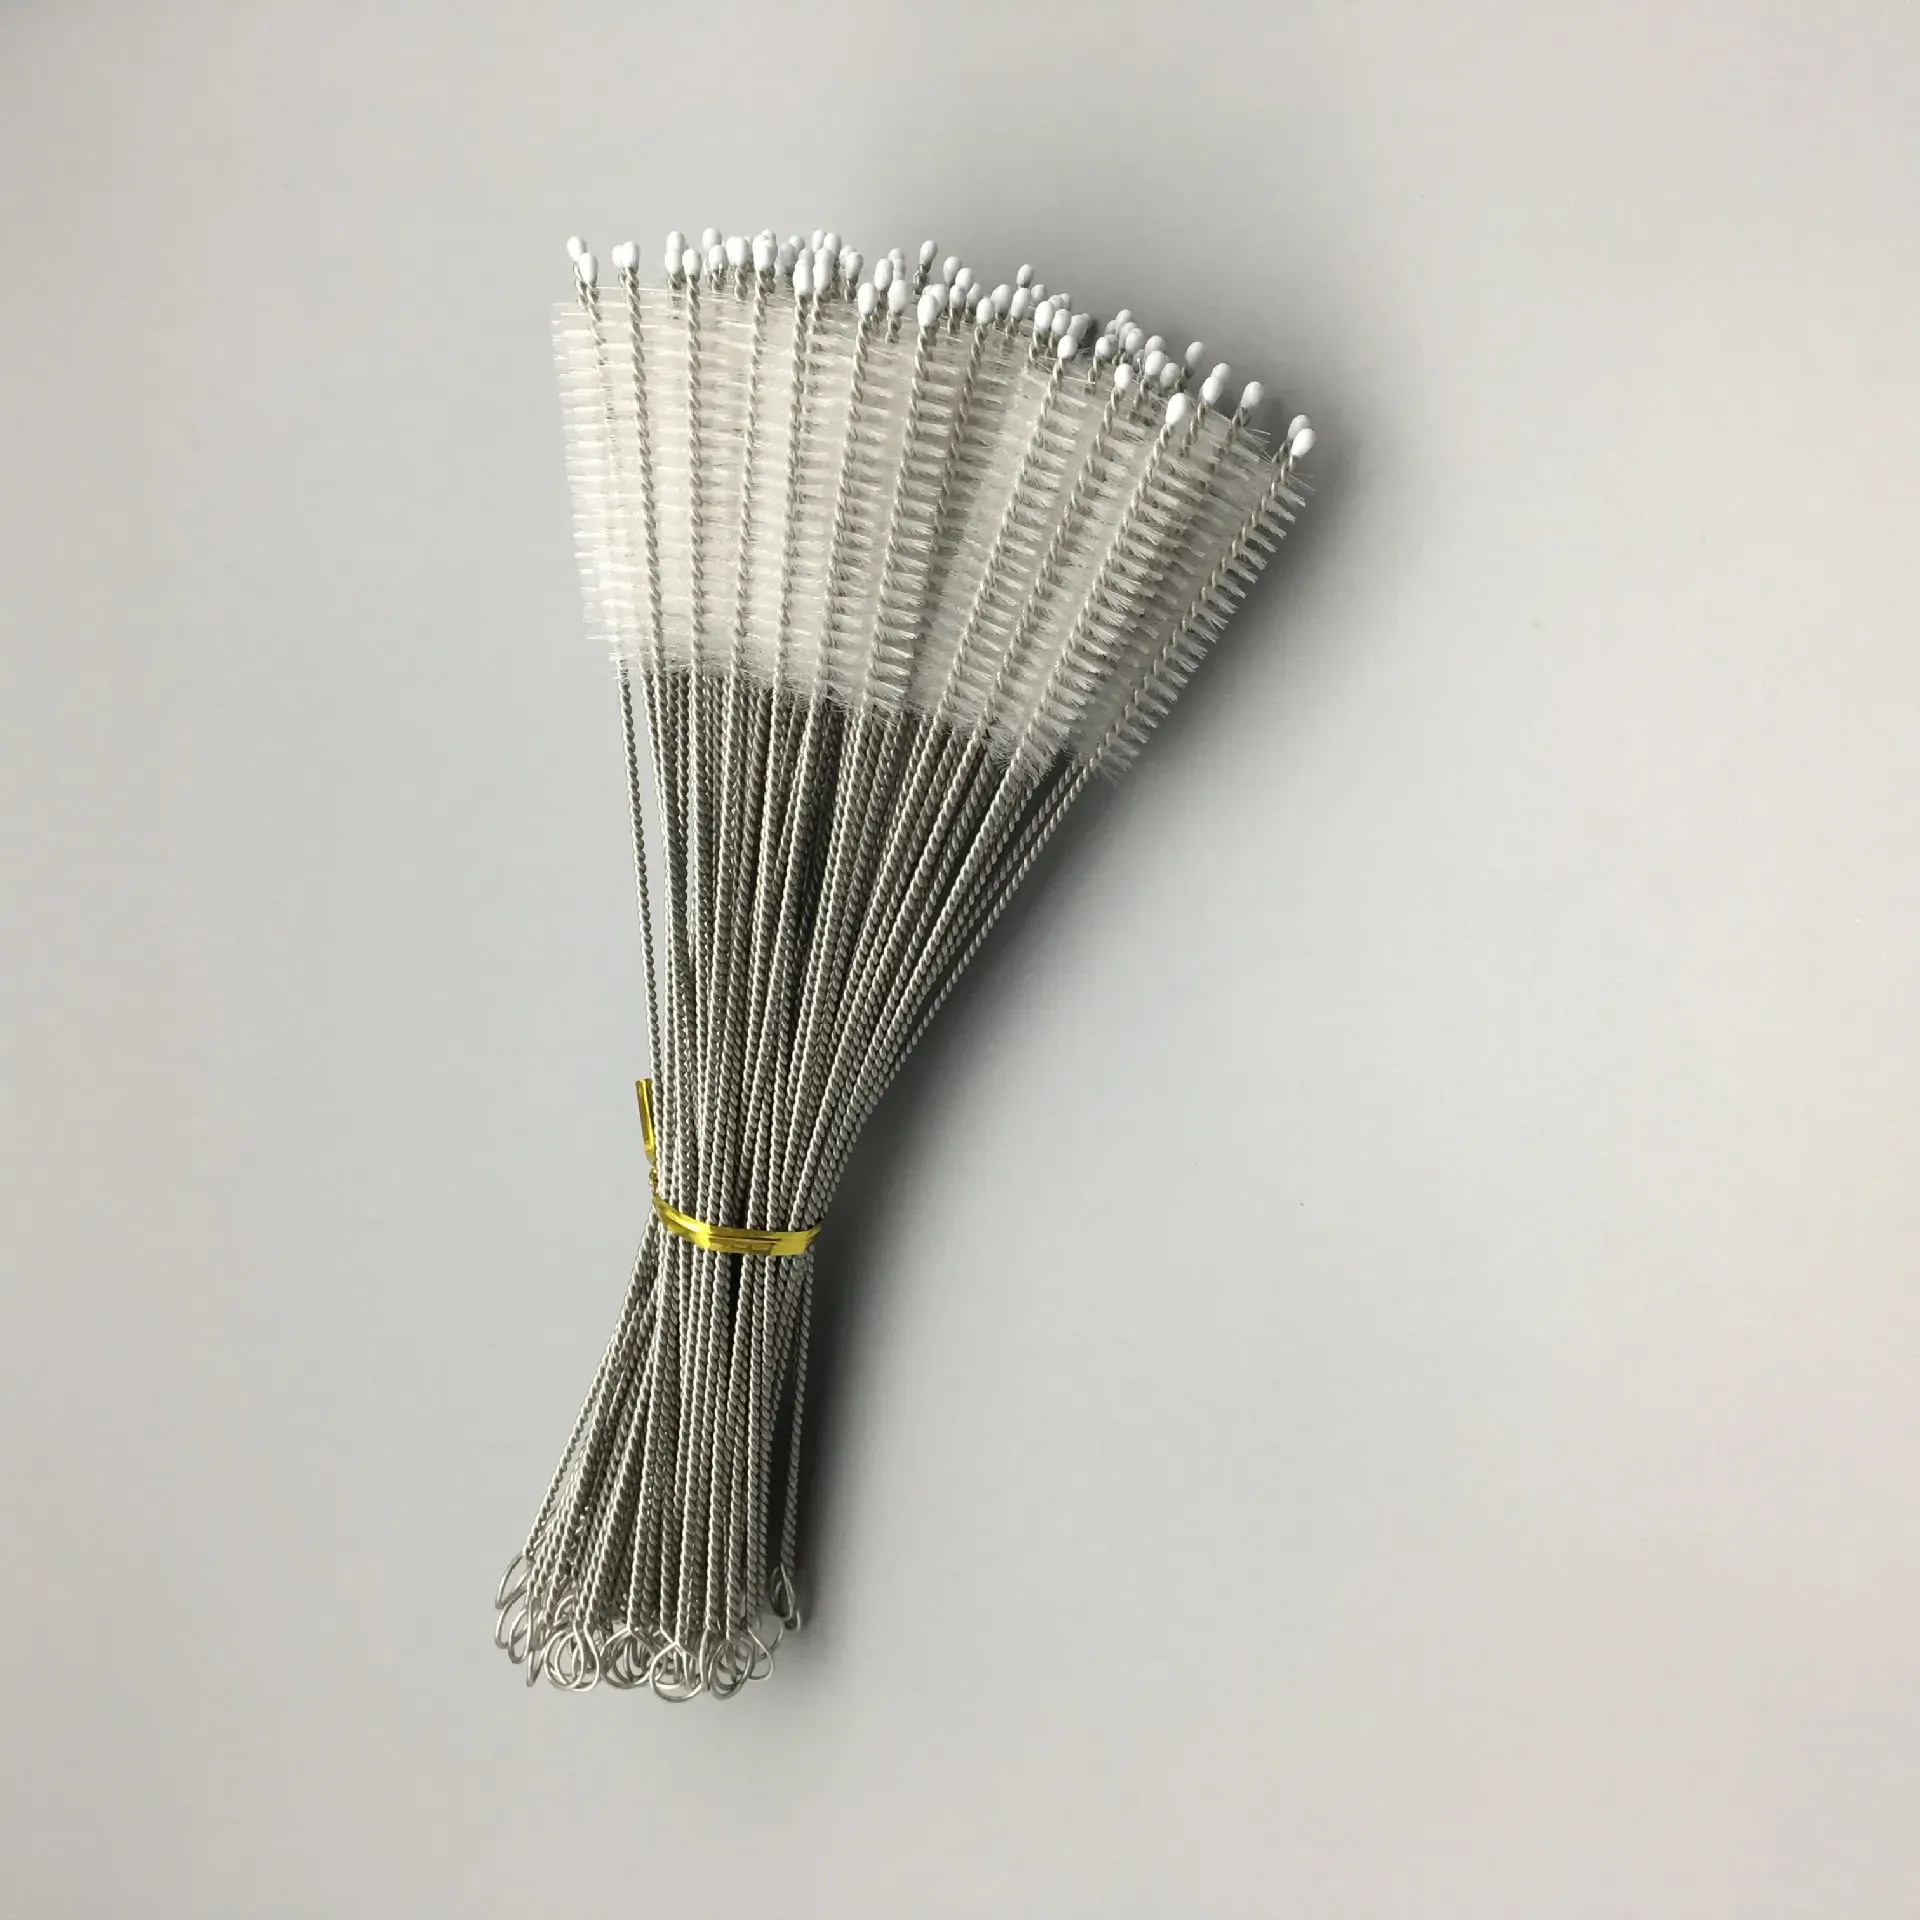 Bar Accessories Drinking Straw Reusable Straws with Cleaner Brush Set High Quality Eco Friendly Stainless Steel Metal Straw